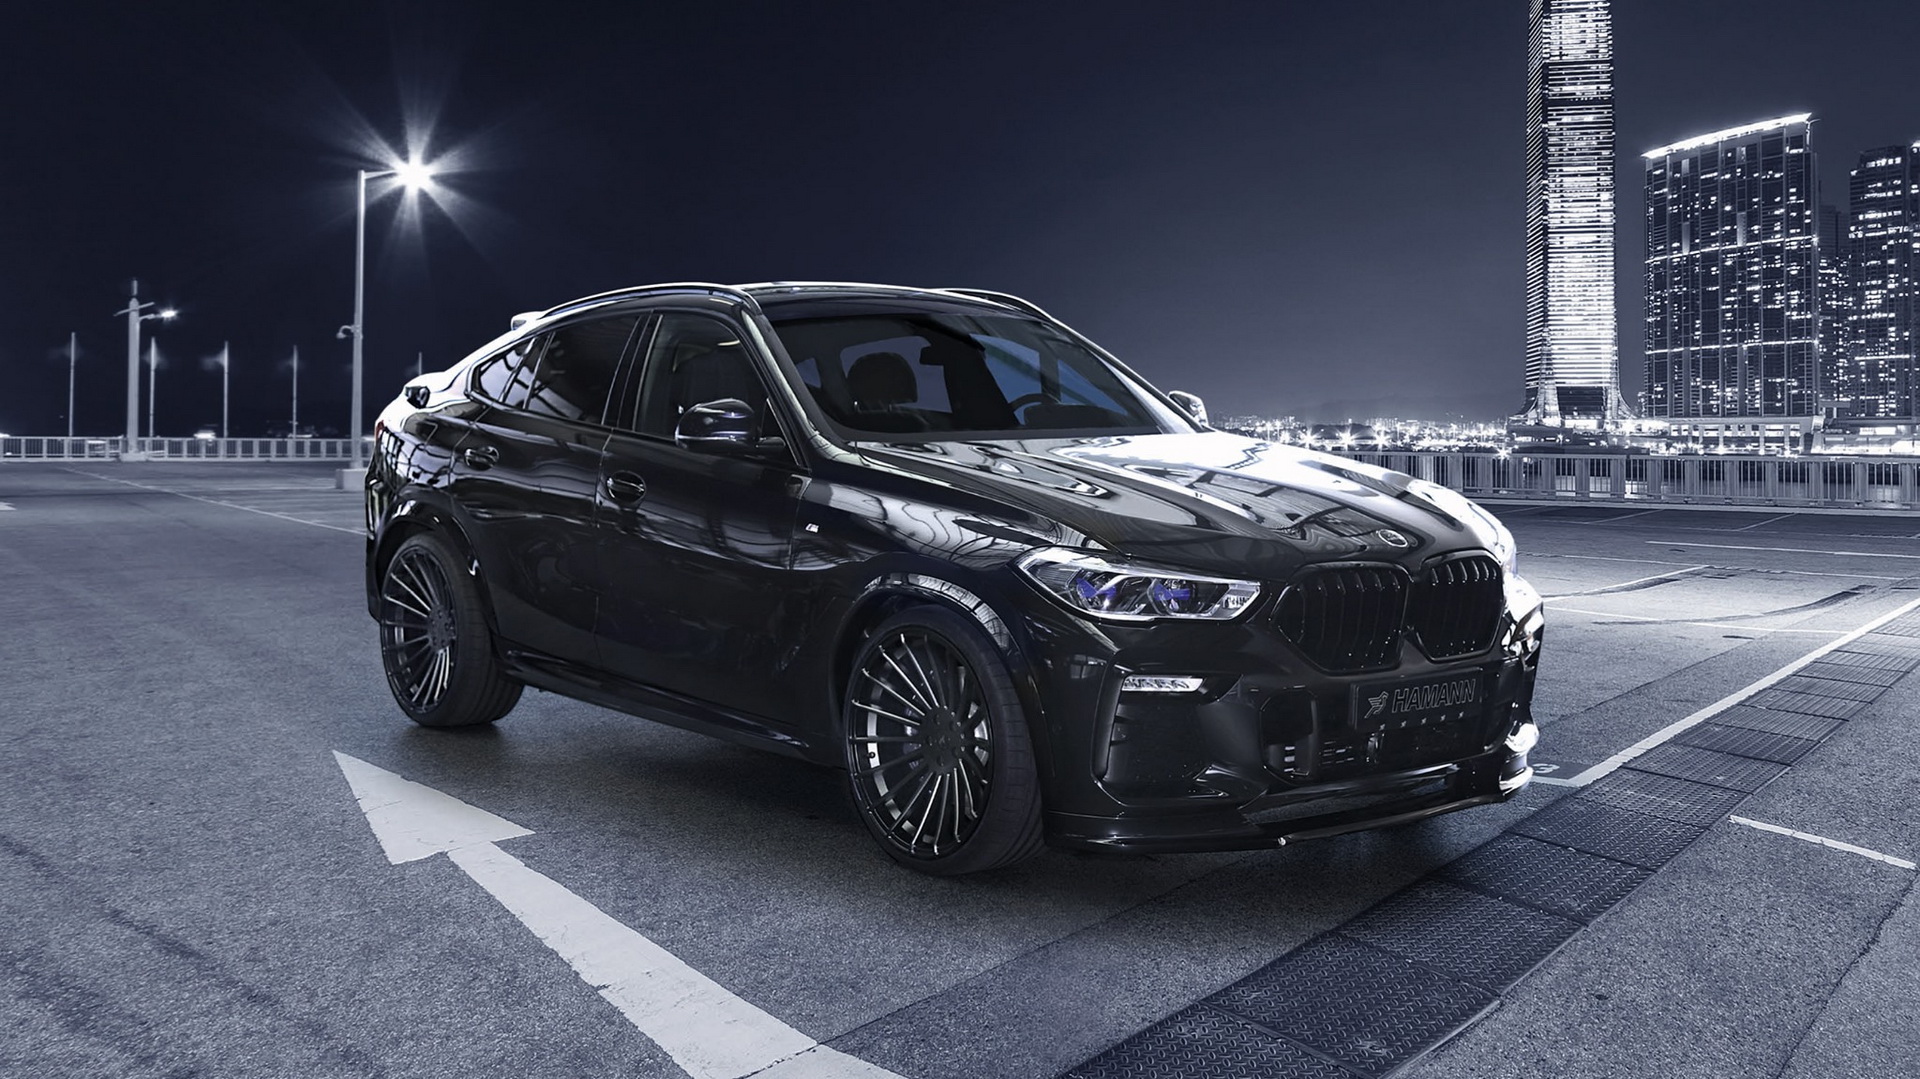 Photo Gallery Hamann Gives the new BMW X6 its usual treatment